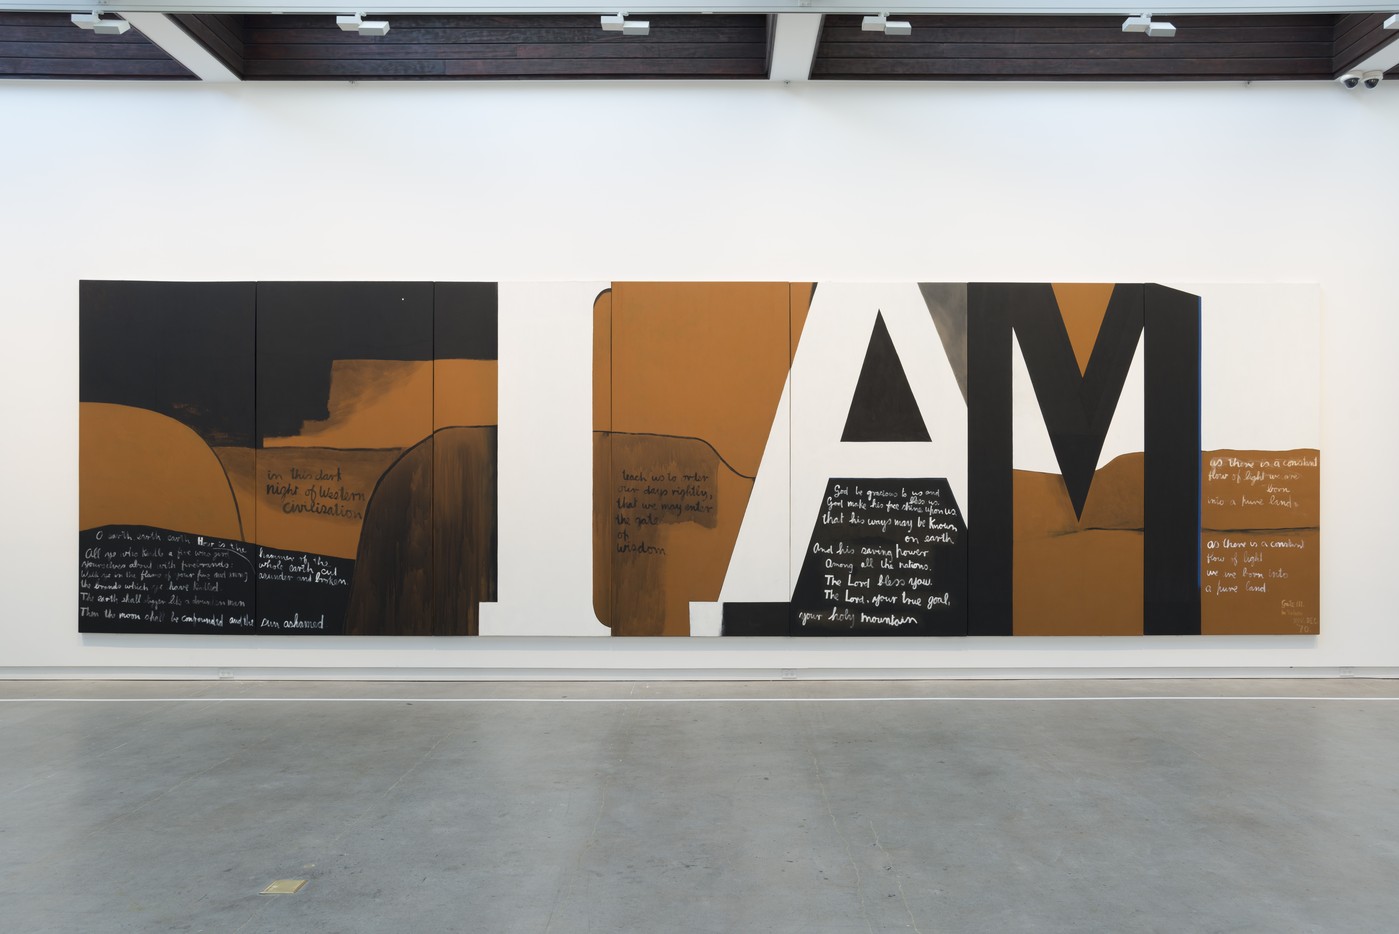 Installation view of ‘A way through’ - Colin McCahon’s Gate III at CoCA, 2020. Victoria University of Wellington Art Collection. Photographer: Mitchell Bright